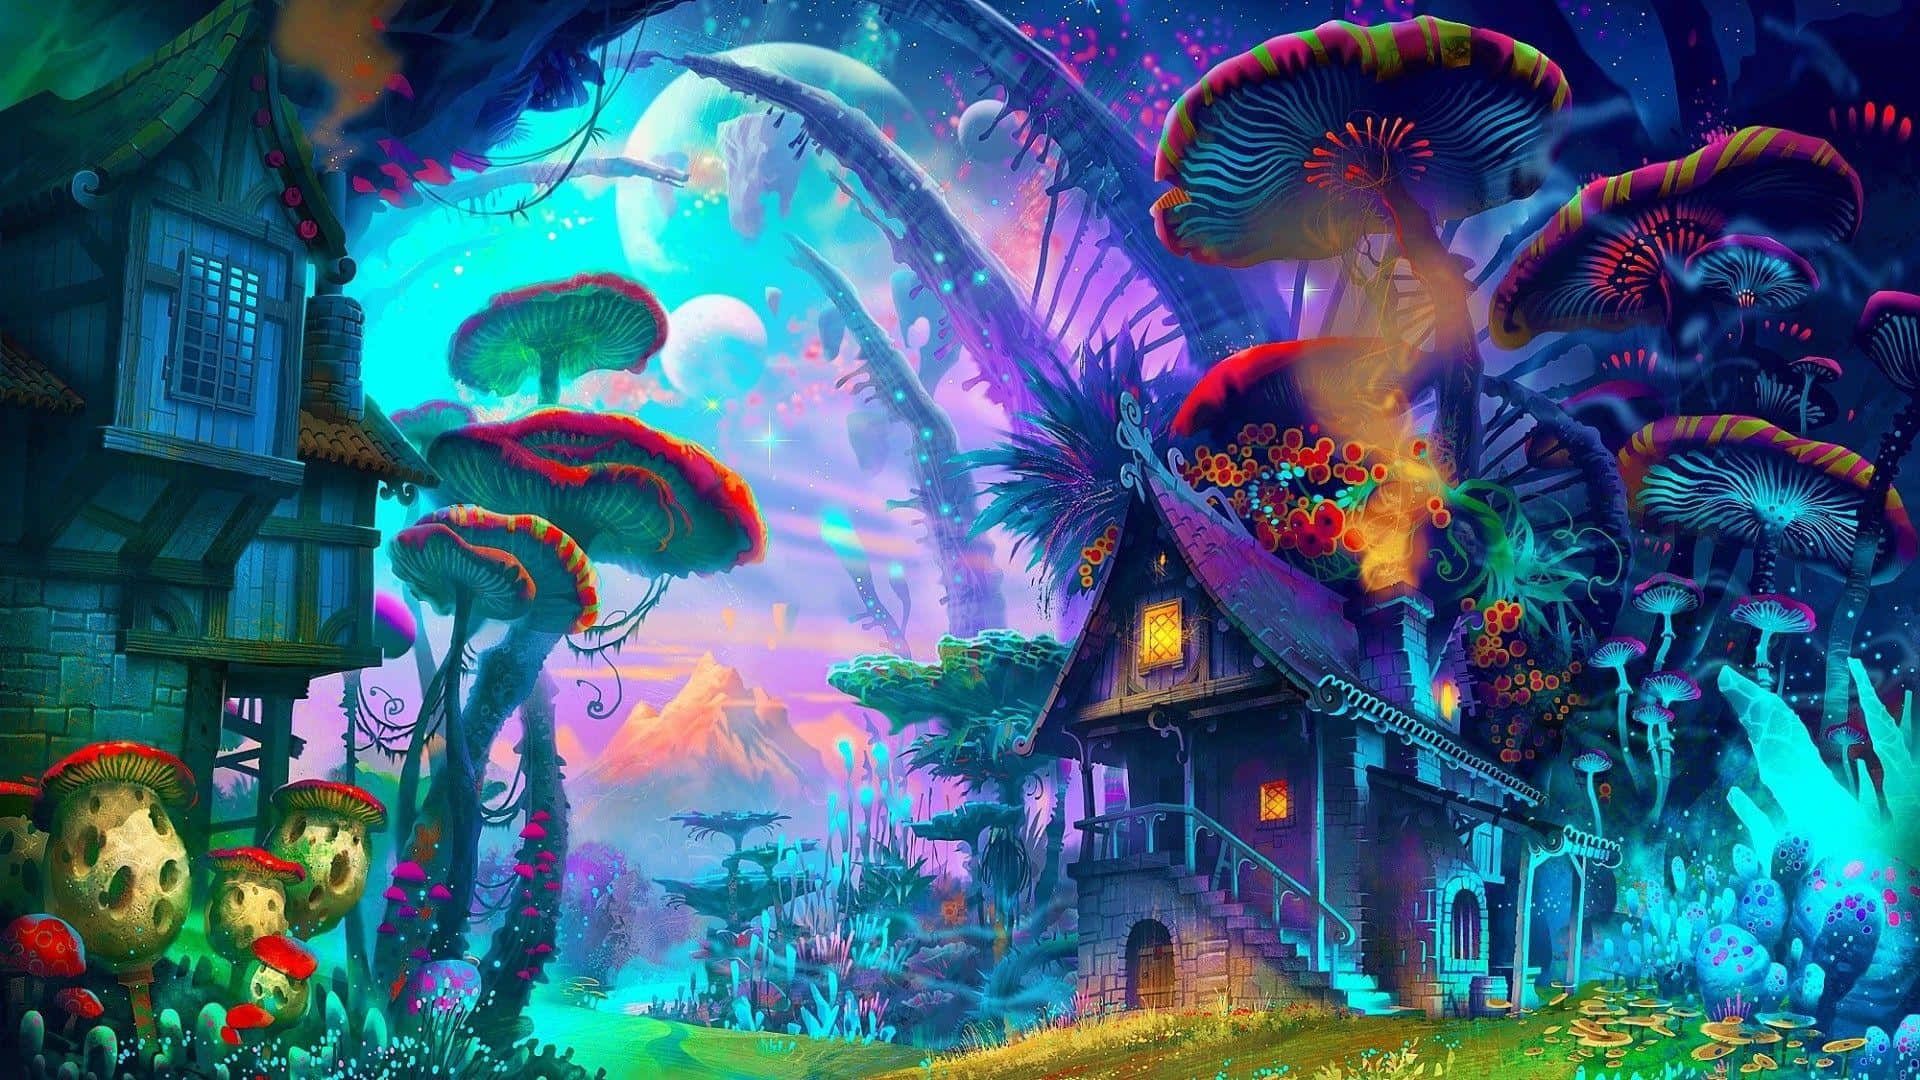 A Colorful Fantasy Scene With A House And Mushrooms